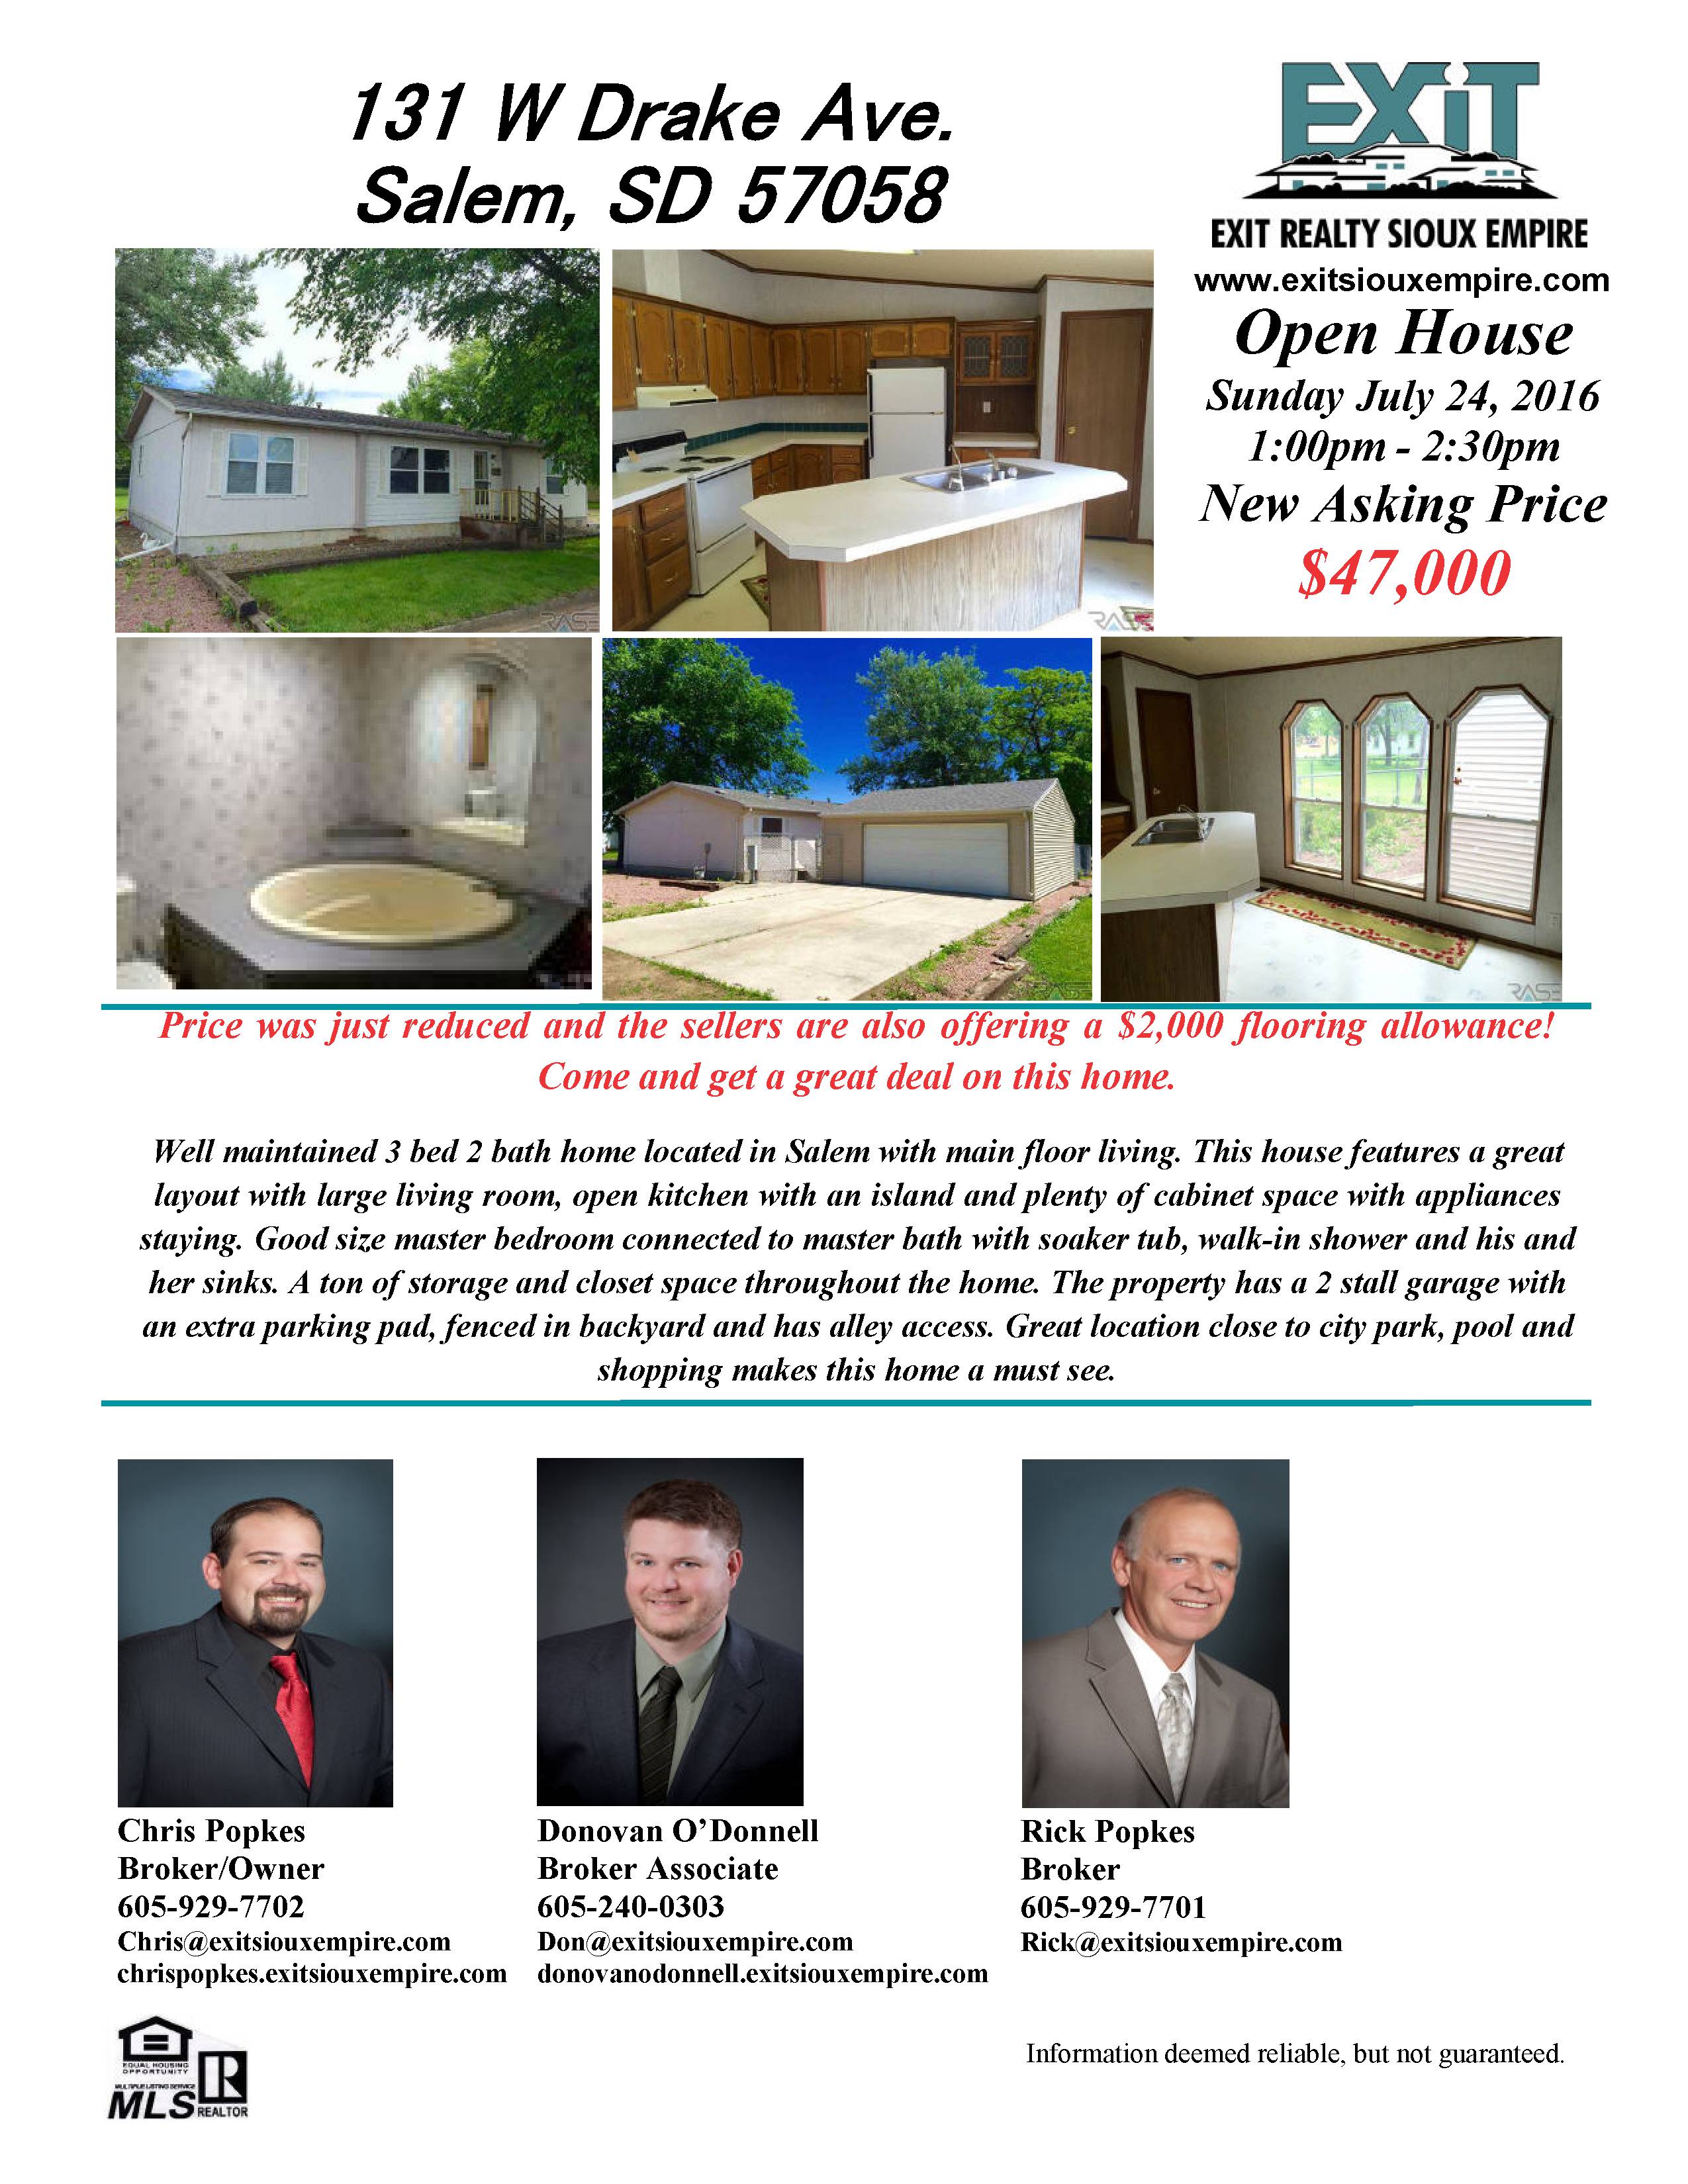 Open house this Sunday 131 W Drake Ave, Salem, SD